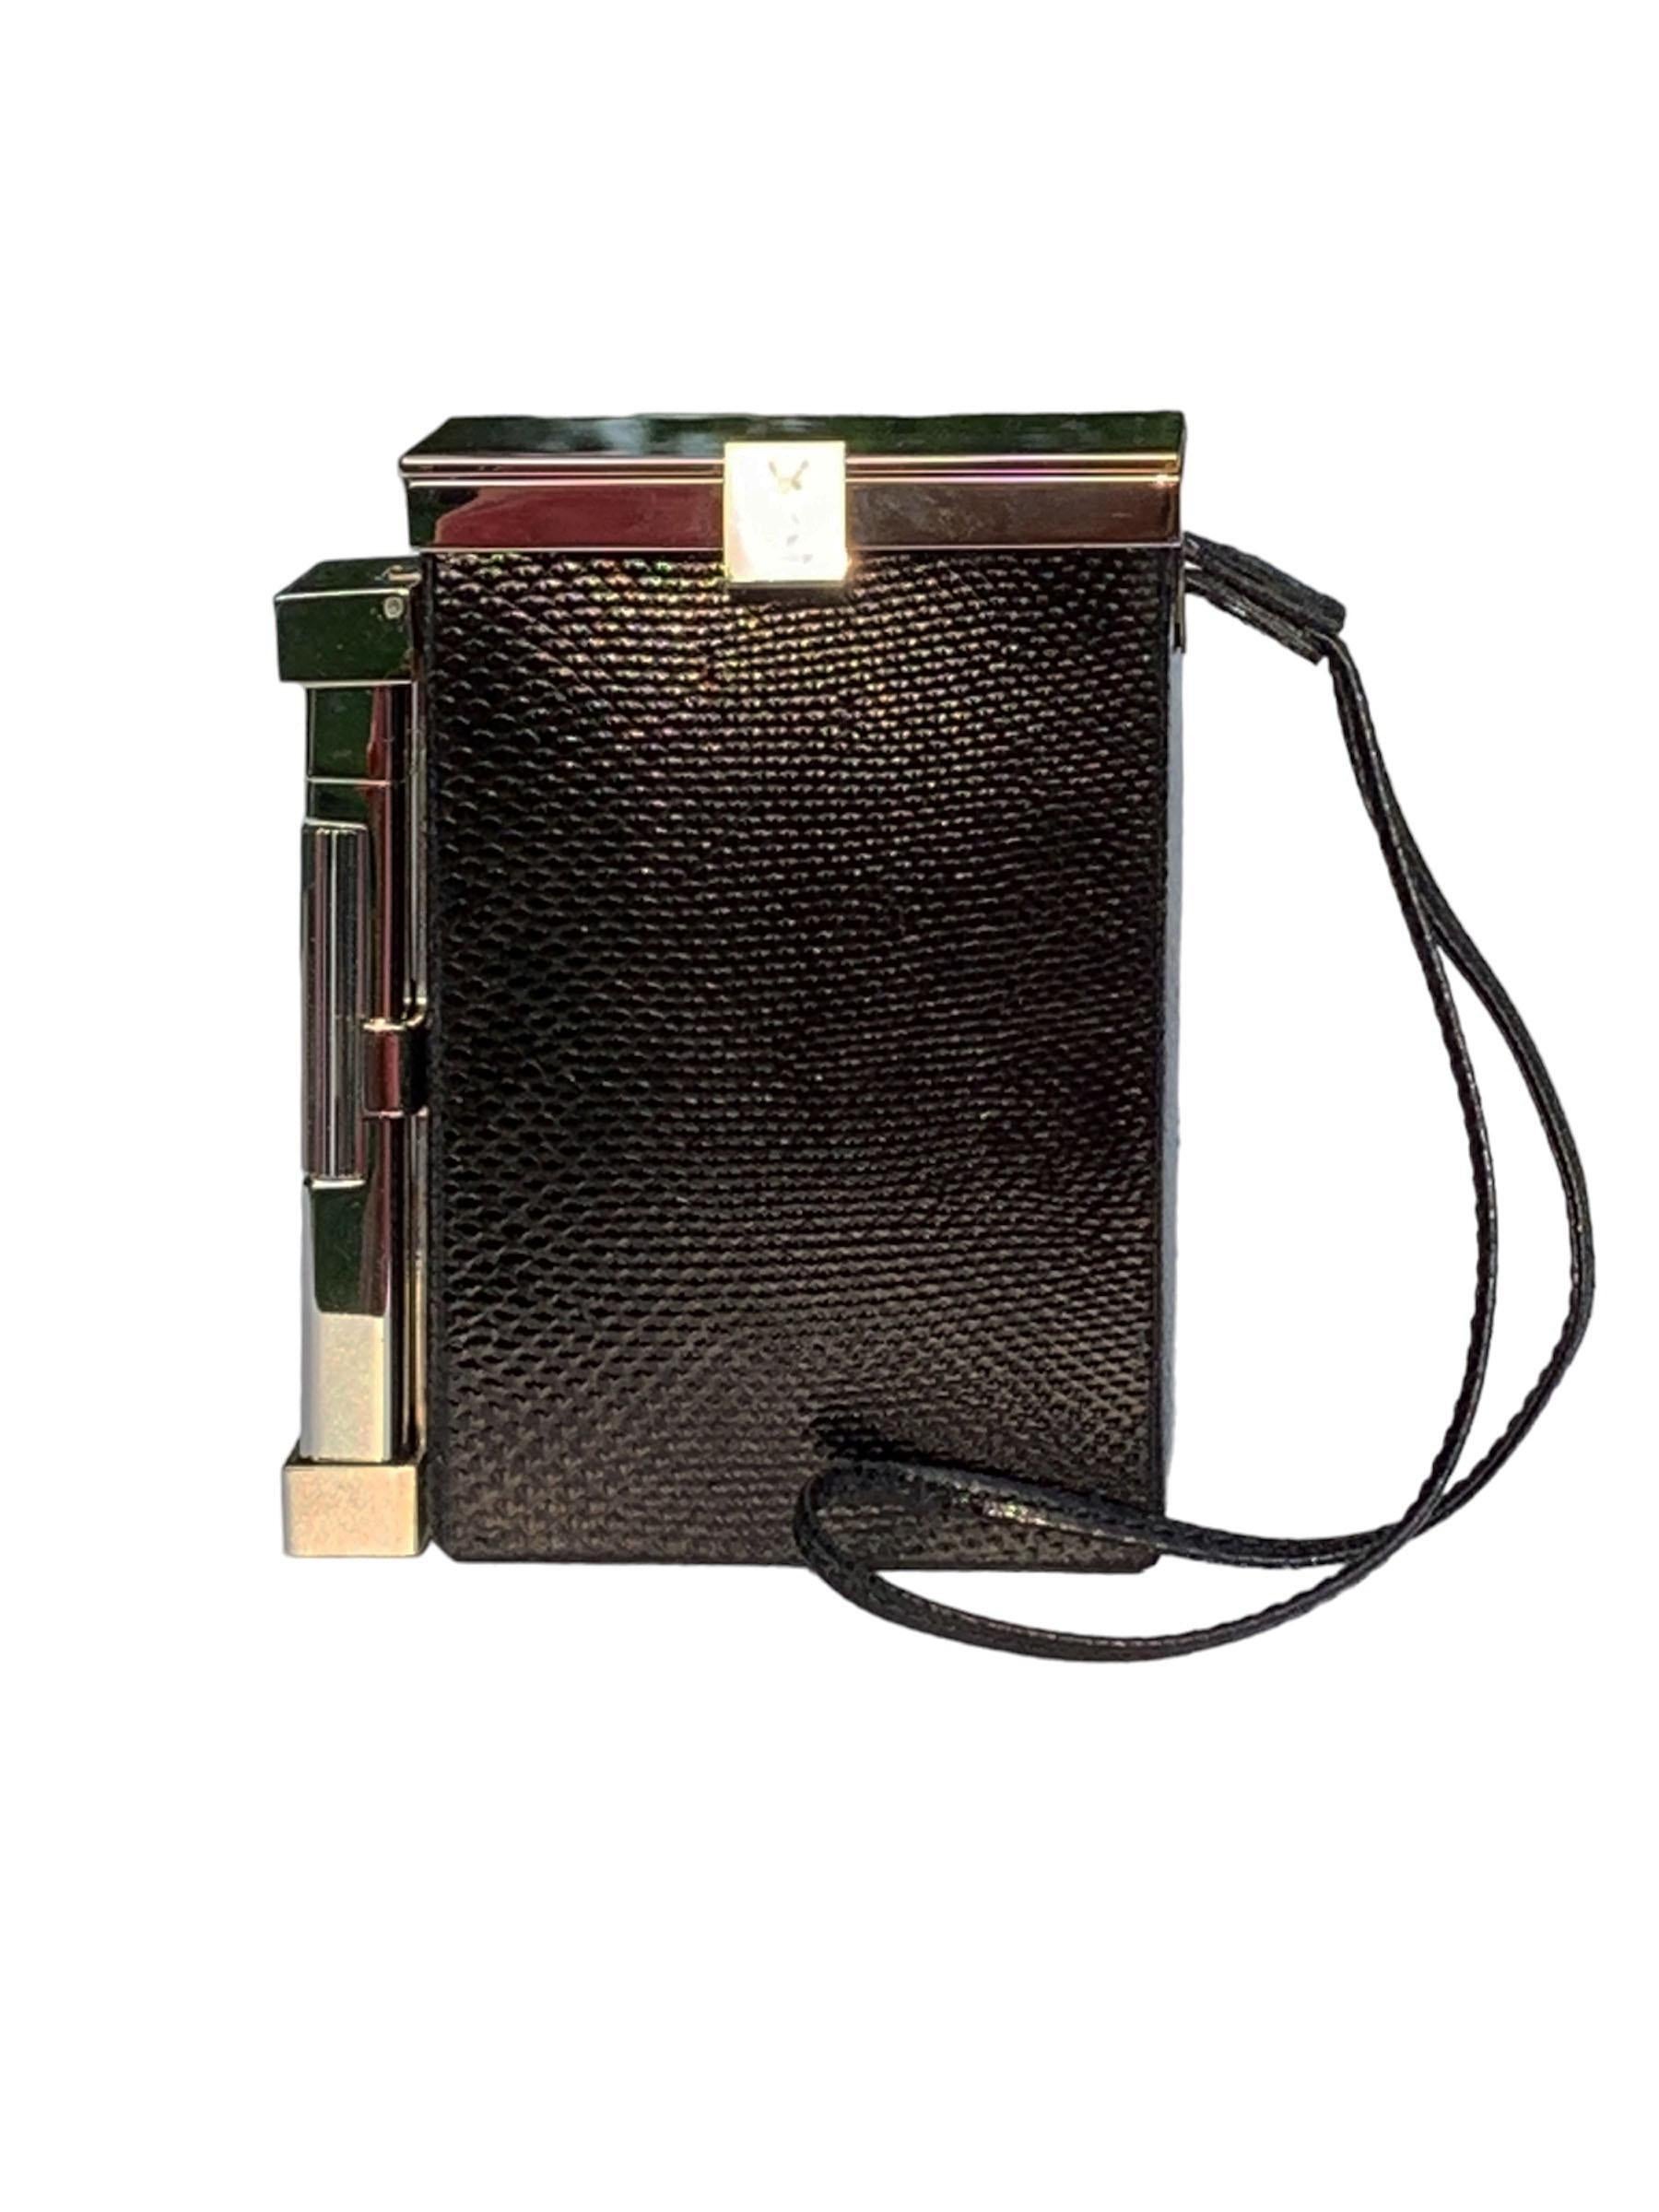 Tom Ford for Yves Saint Laurent
Spring/Summer 2001 Collection
An Yves Saint Laurent snake leather cigarette case and lighter. This item features a chrome tone latched hinged top that opens to a space suitable for a pack of cigarettes. Another